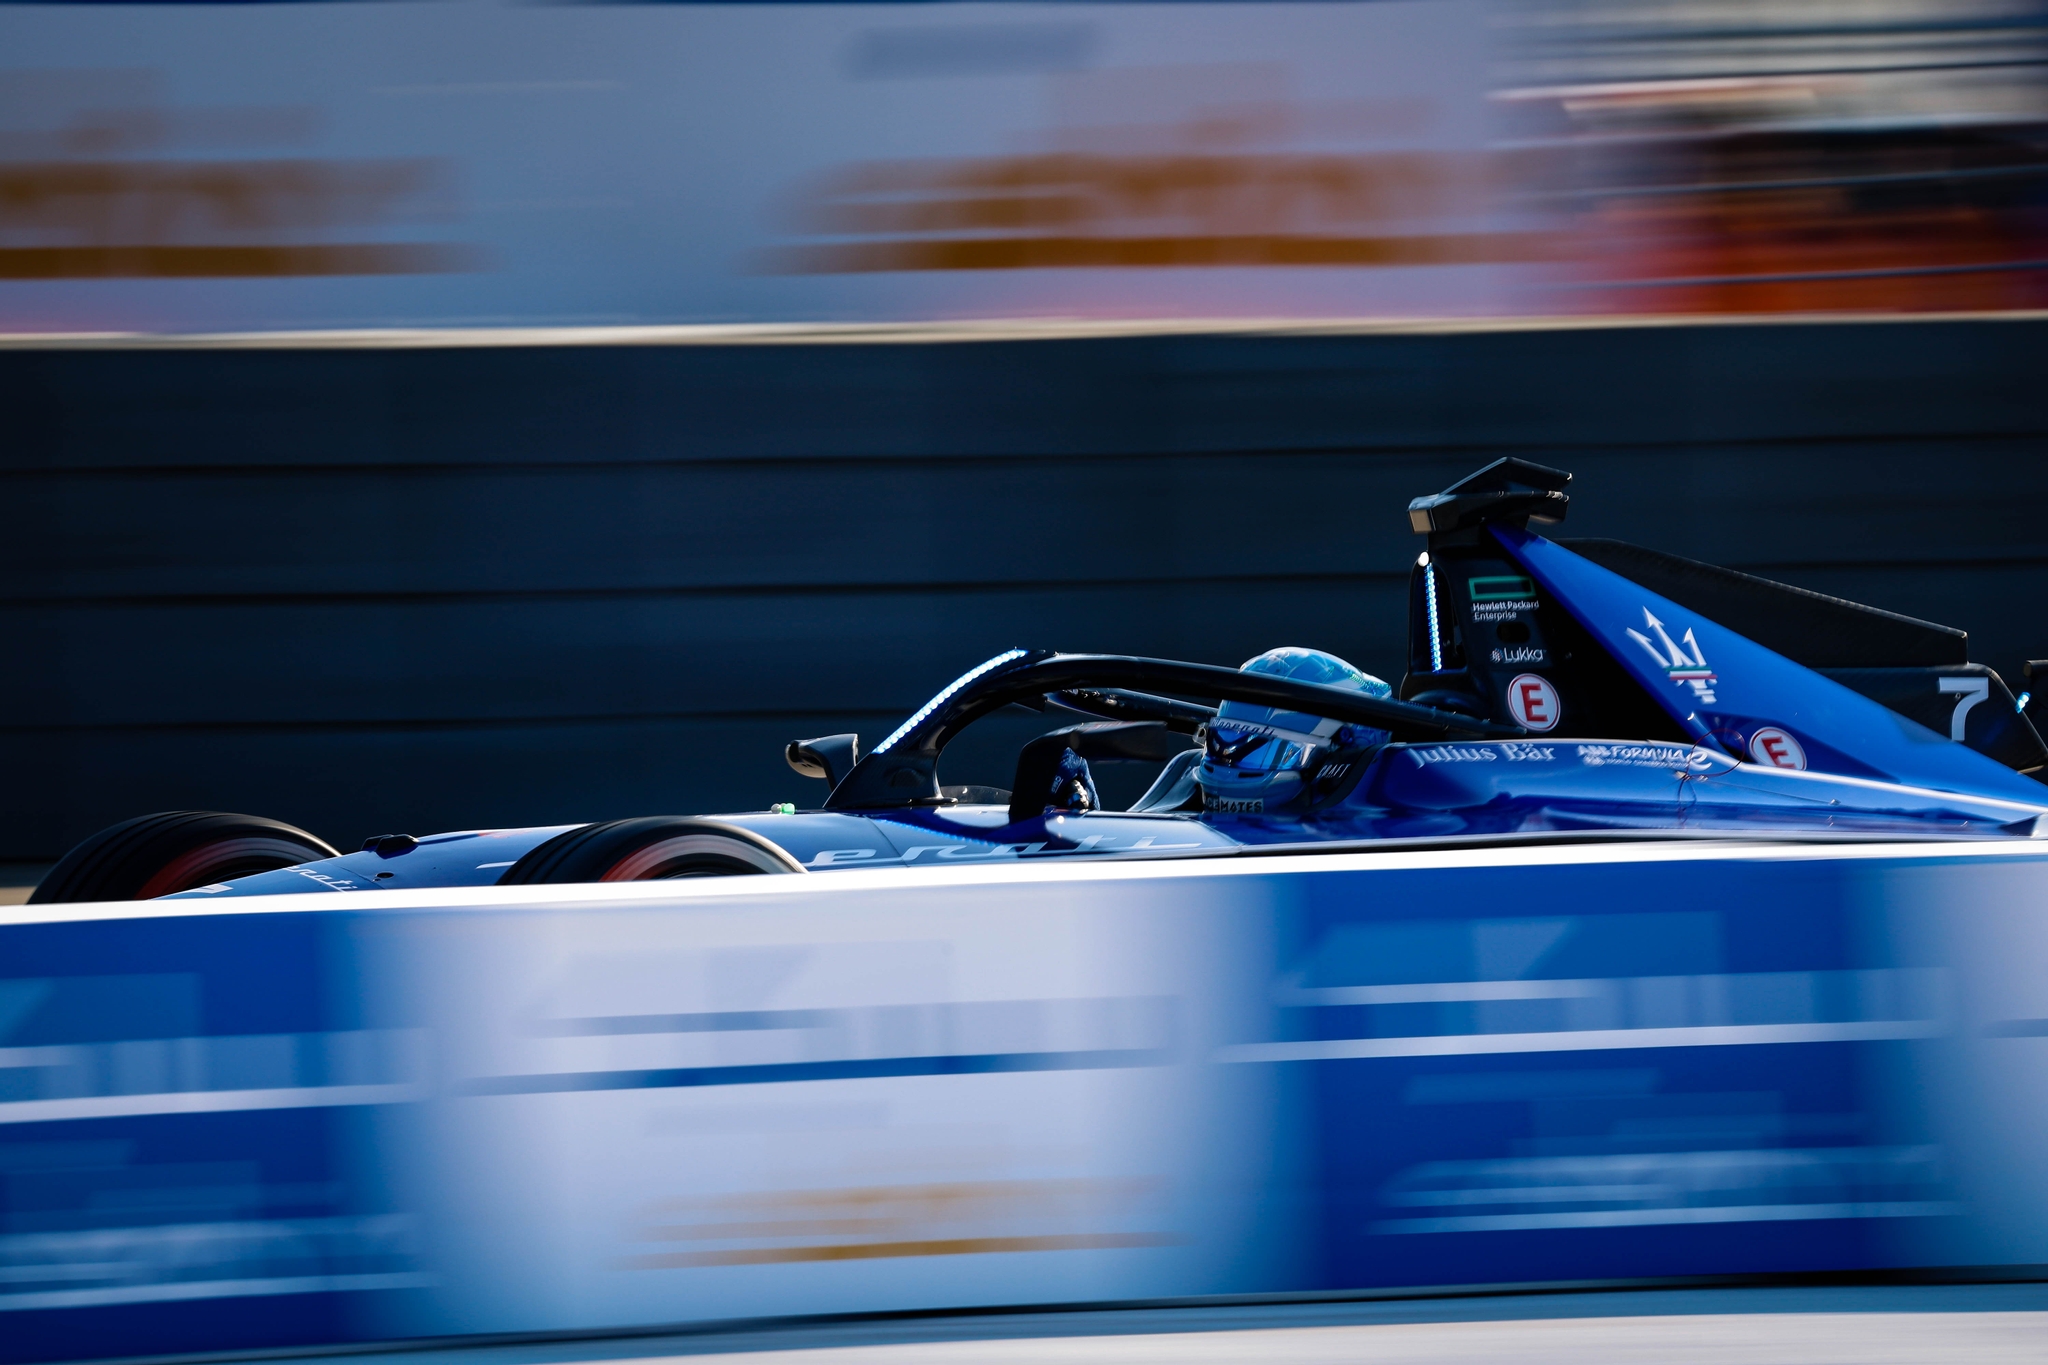 the divebomb that finally ended maserati’s painful formula e wait